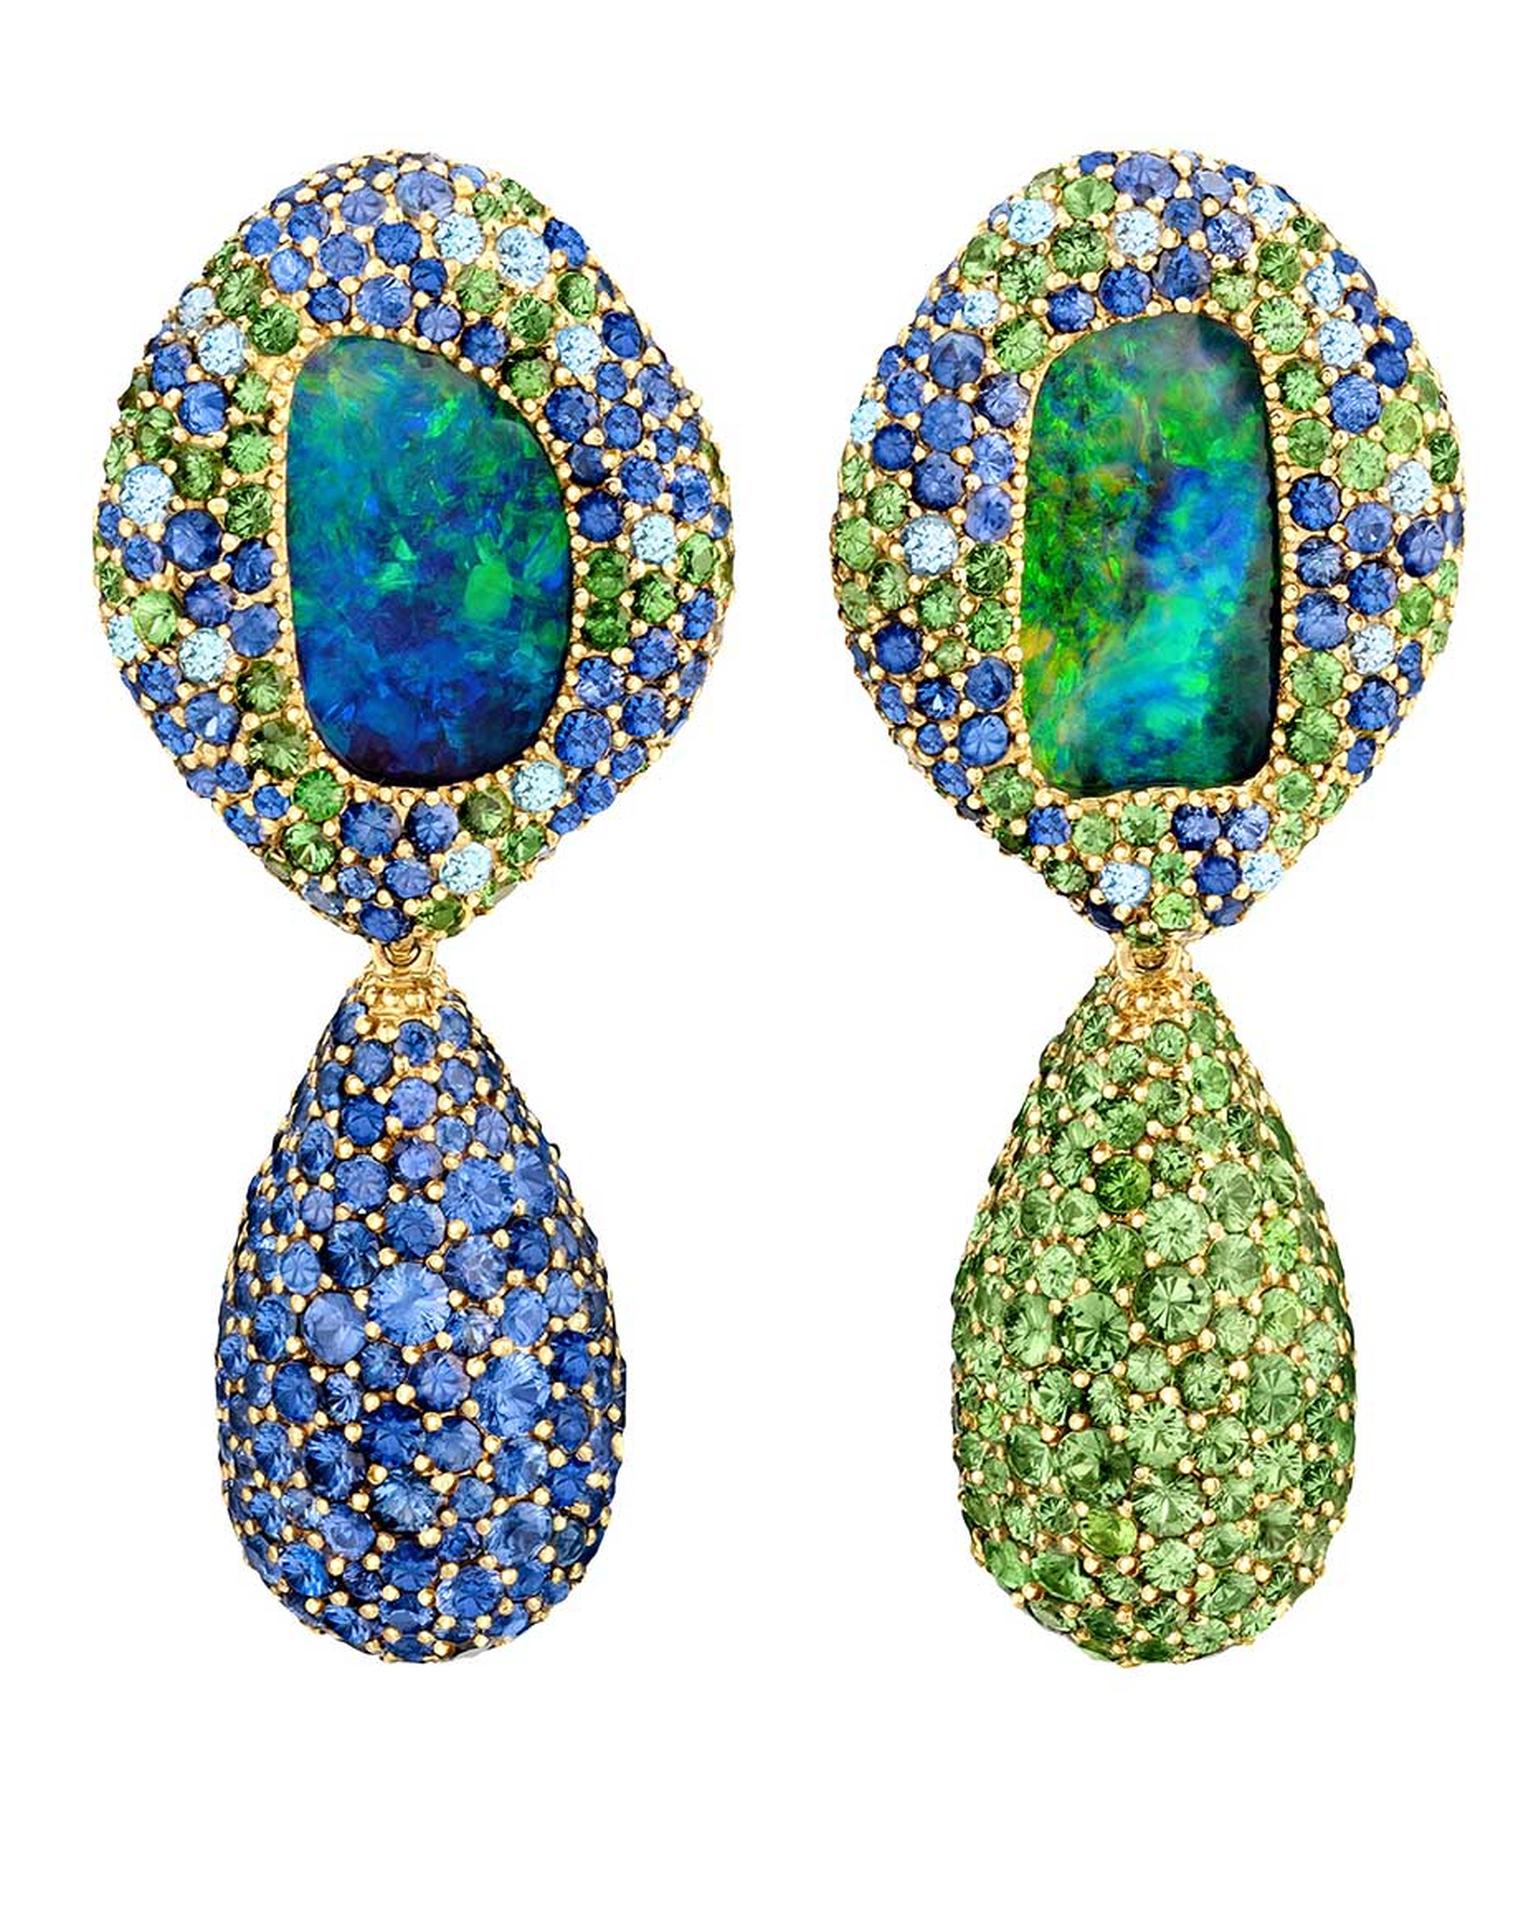 Margot McKinney Objects of Desire 130th anniversary collection earrings with Lightning Ridge opals surrounded by tsavorite garnets, sapphires and diamonds with detachable pendant drops.